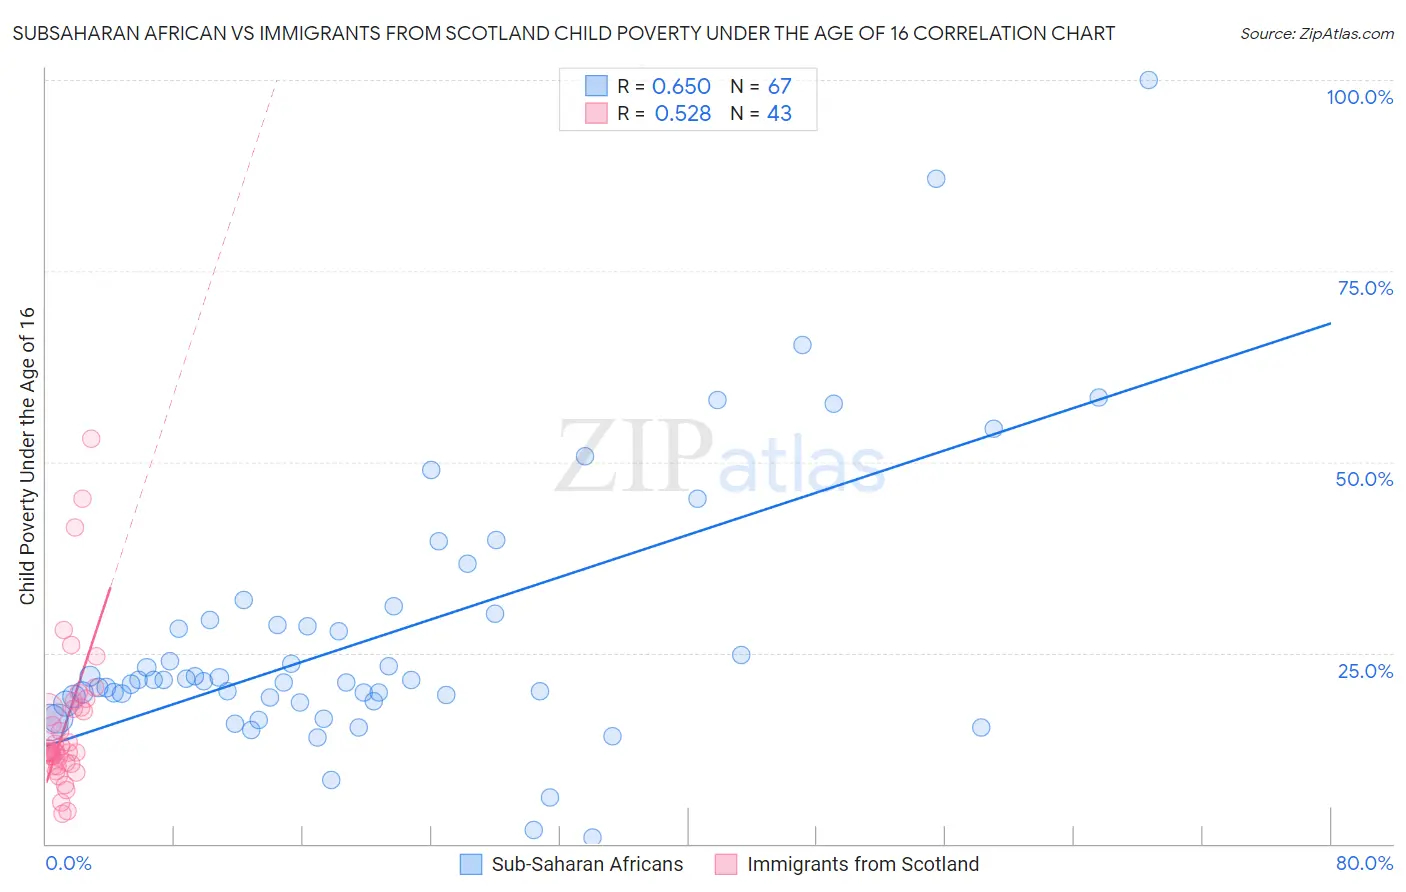 Subsaharan African vs Immigrants from Scotland Child Poverty Under the Age of 16